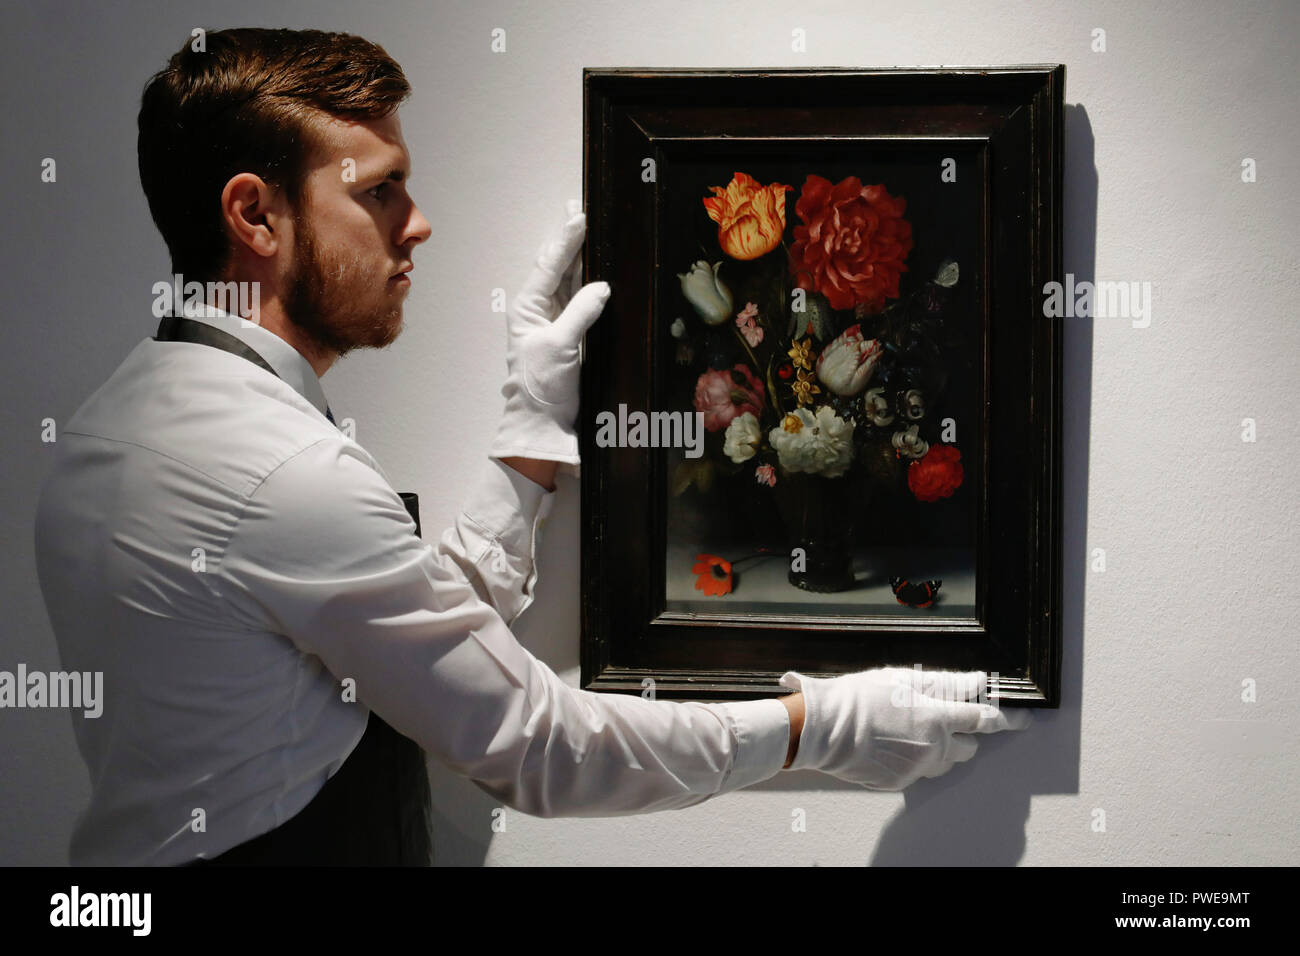 London, UK, 16th Oct 2018. Christie's art handler adjusts Dutch master Ambrosius Bosschaert, the Elder 's artwork 'Flowers in a berkemeier glass on a stone ledge' at Christie's AuctionHouse in London, UK, Tuesday October 16, 2017. The piece is expected to achieve up to £1.2million when is comes to auction as part of the Albada Jelgersma Collection sale during Christie's Classic Week in December. Photograph : Credit: Luke MacGregor/Alamy Live News Stock Photo